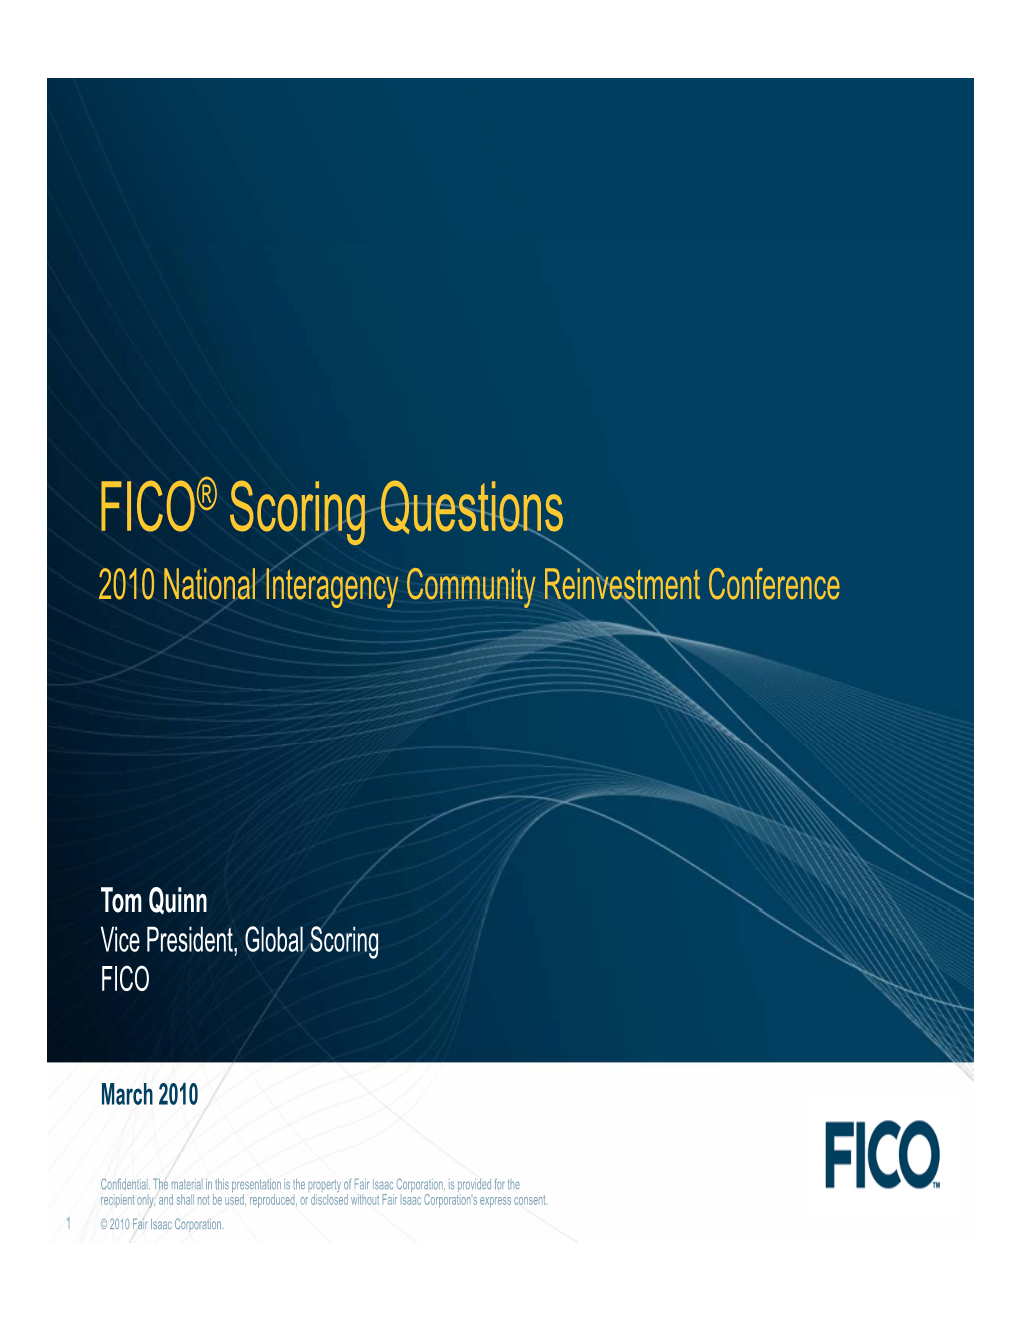 FICO® Scoring Questions 2010 National Interagency Community Reinvestment Conference